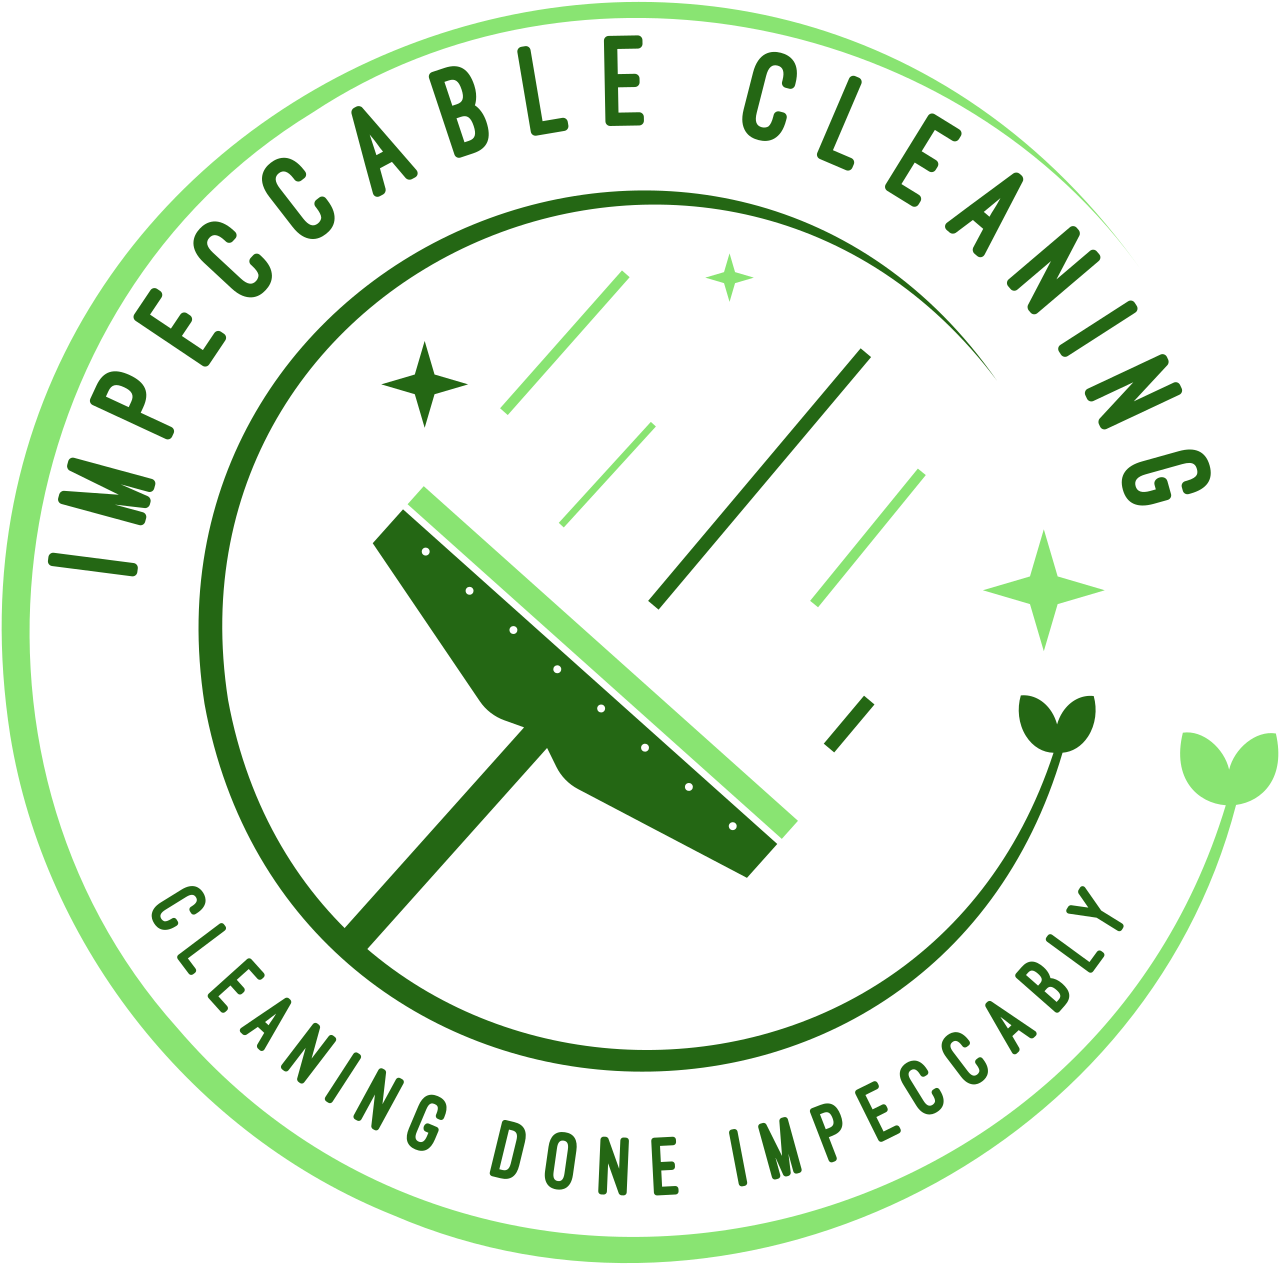 Impeccable Cleaning 's logo